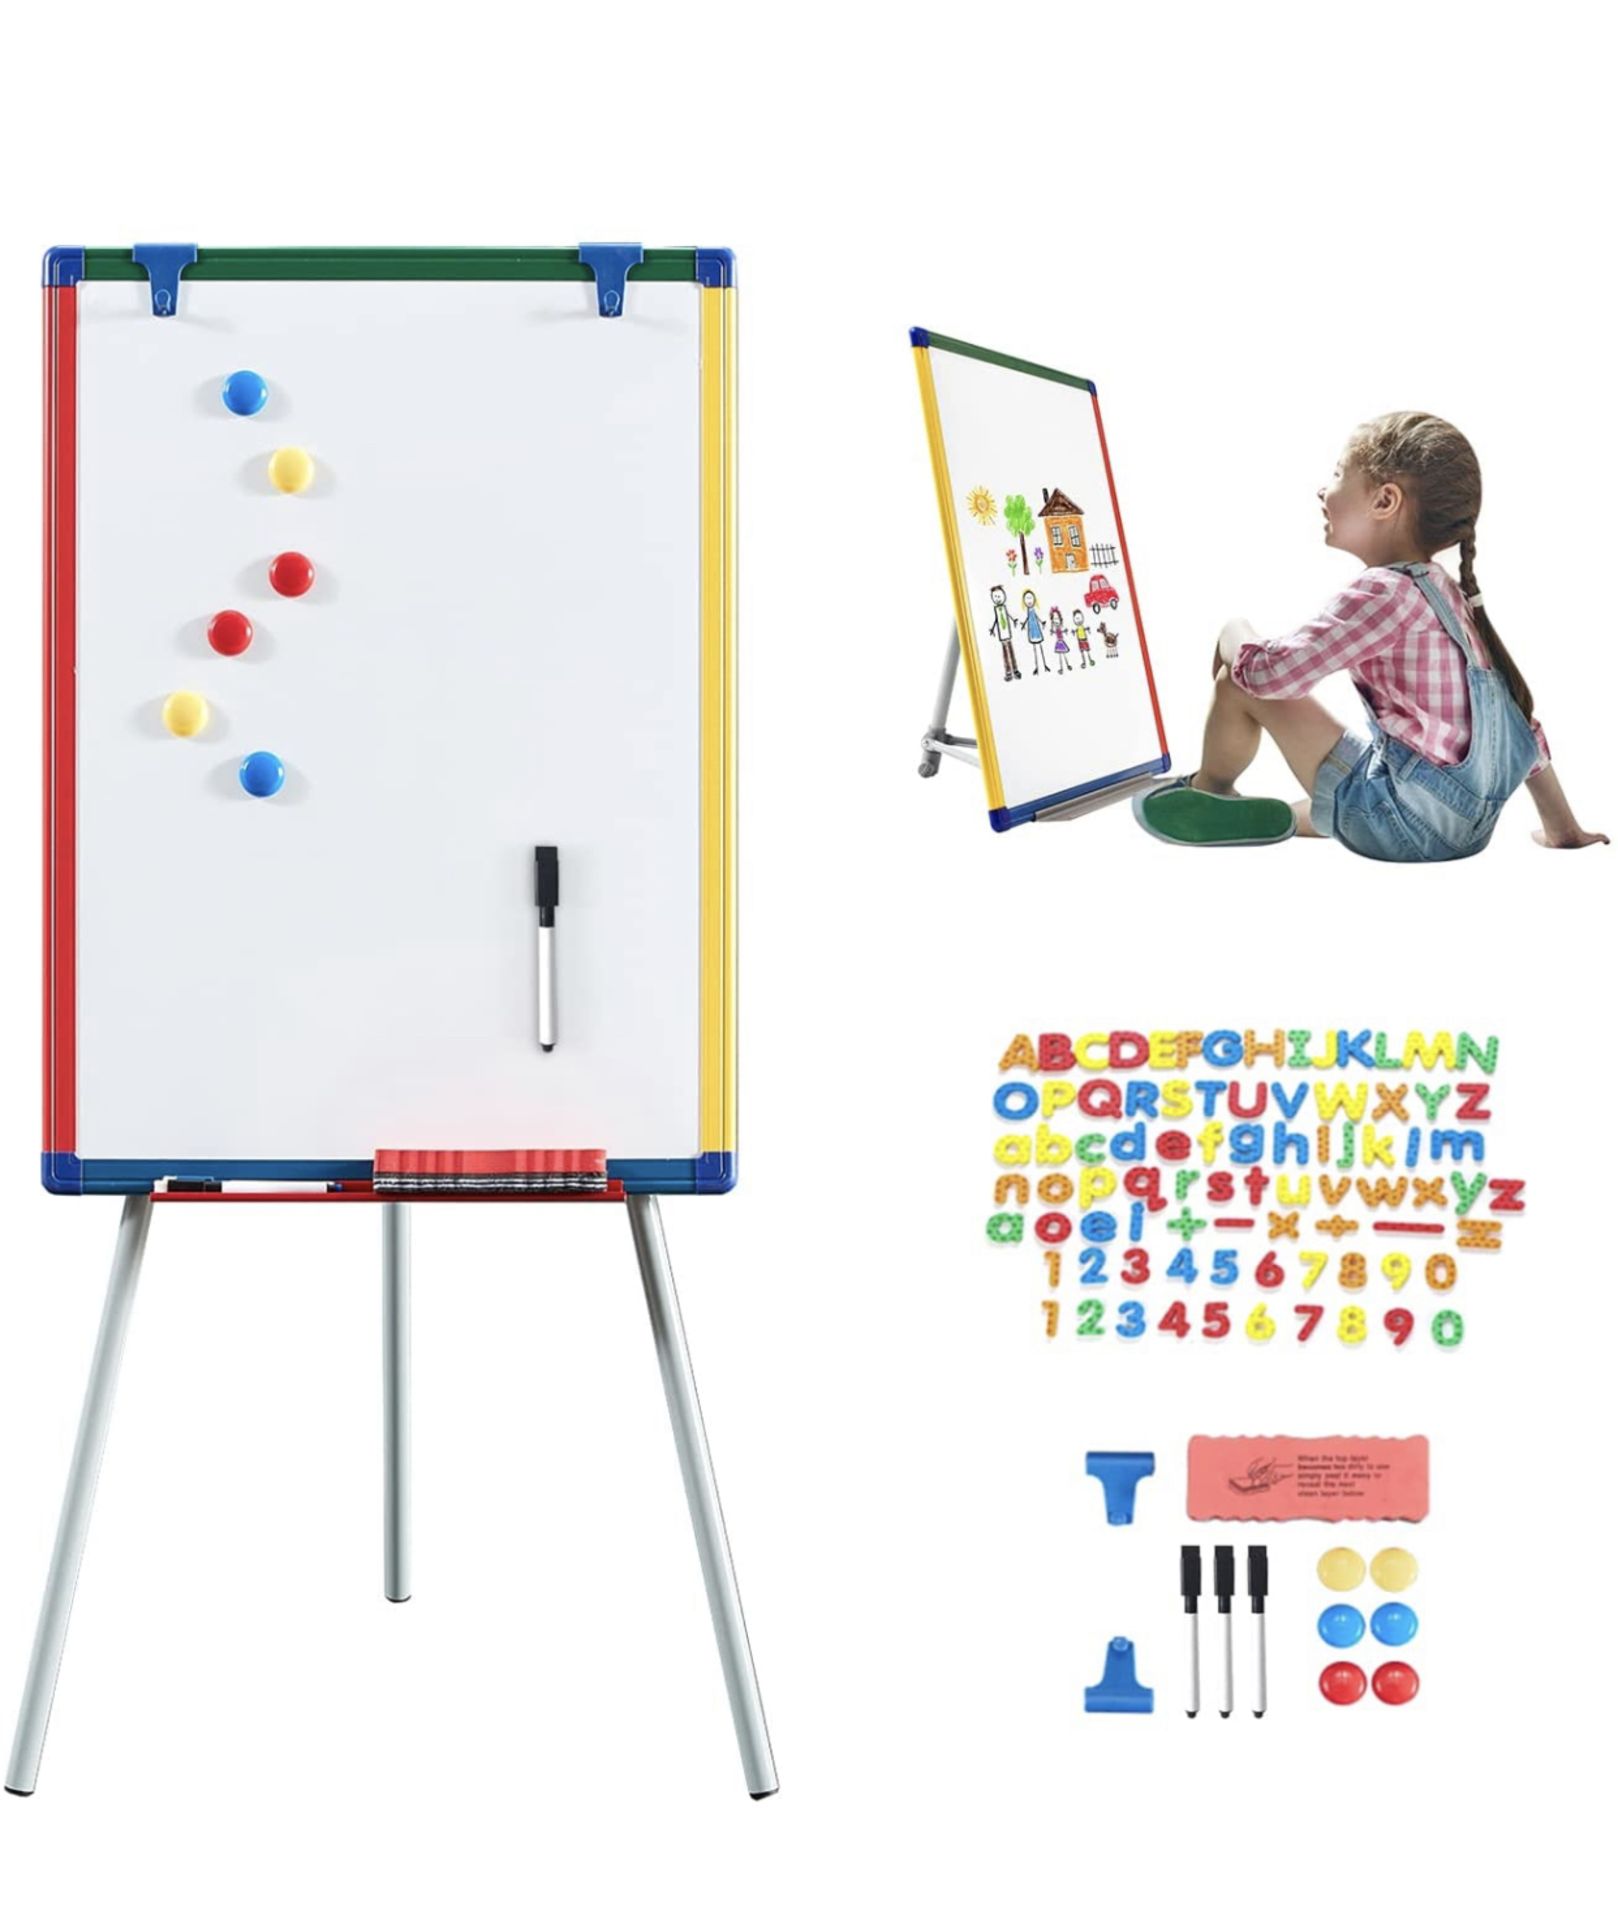 Makello Whiteboard Easel with Magnetic Letters and Numbers RRP £43.99